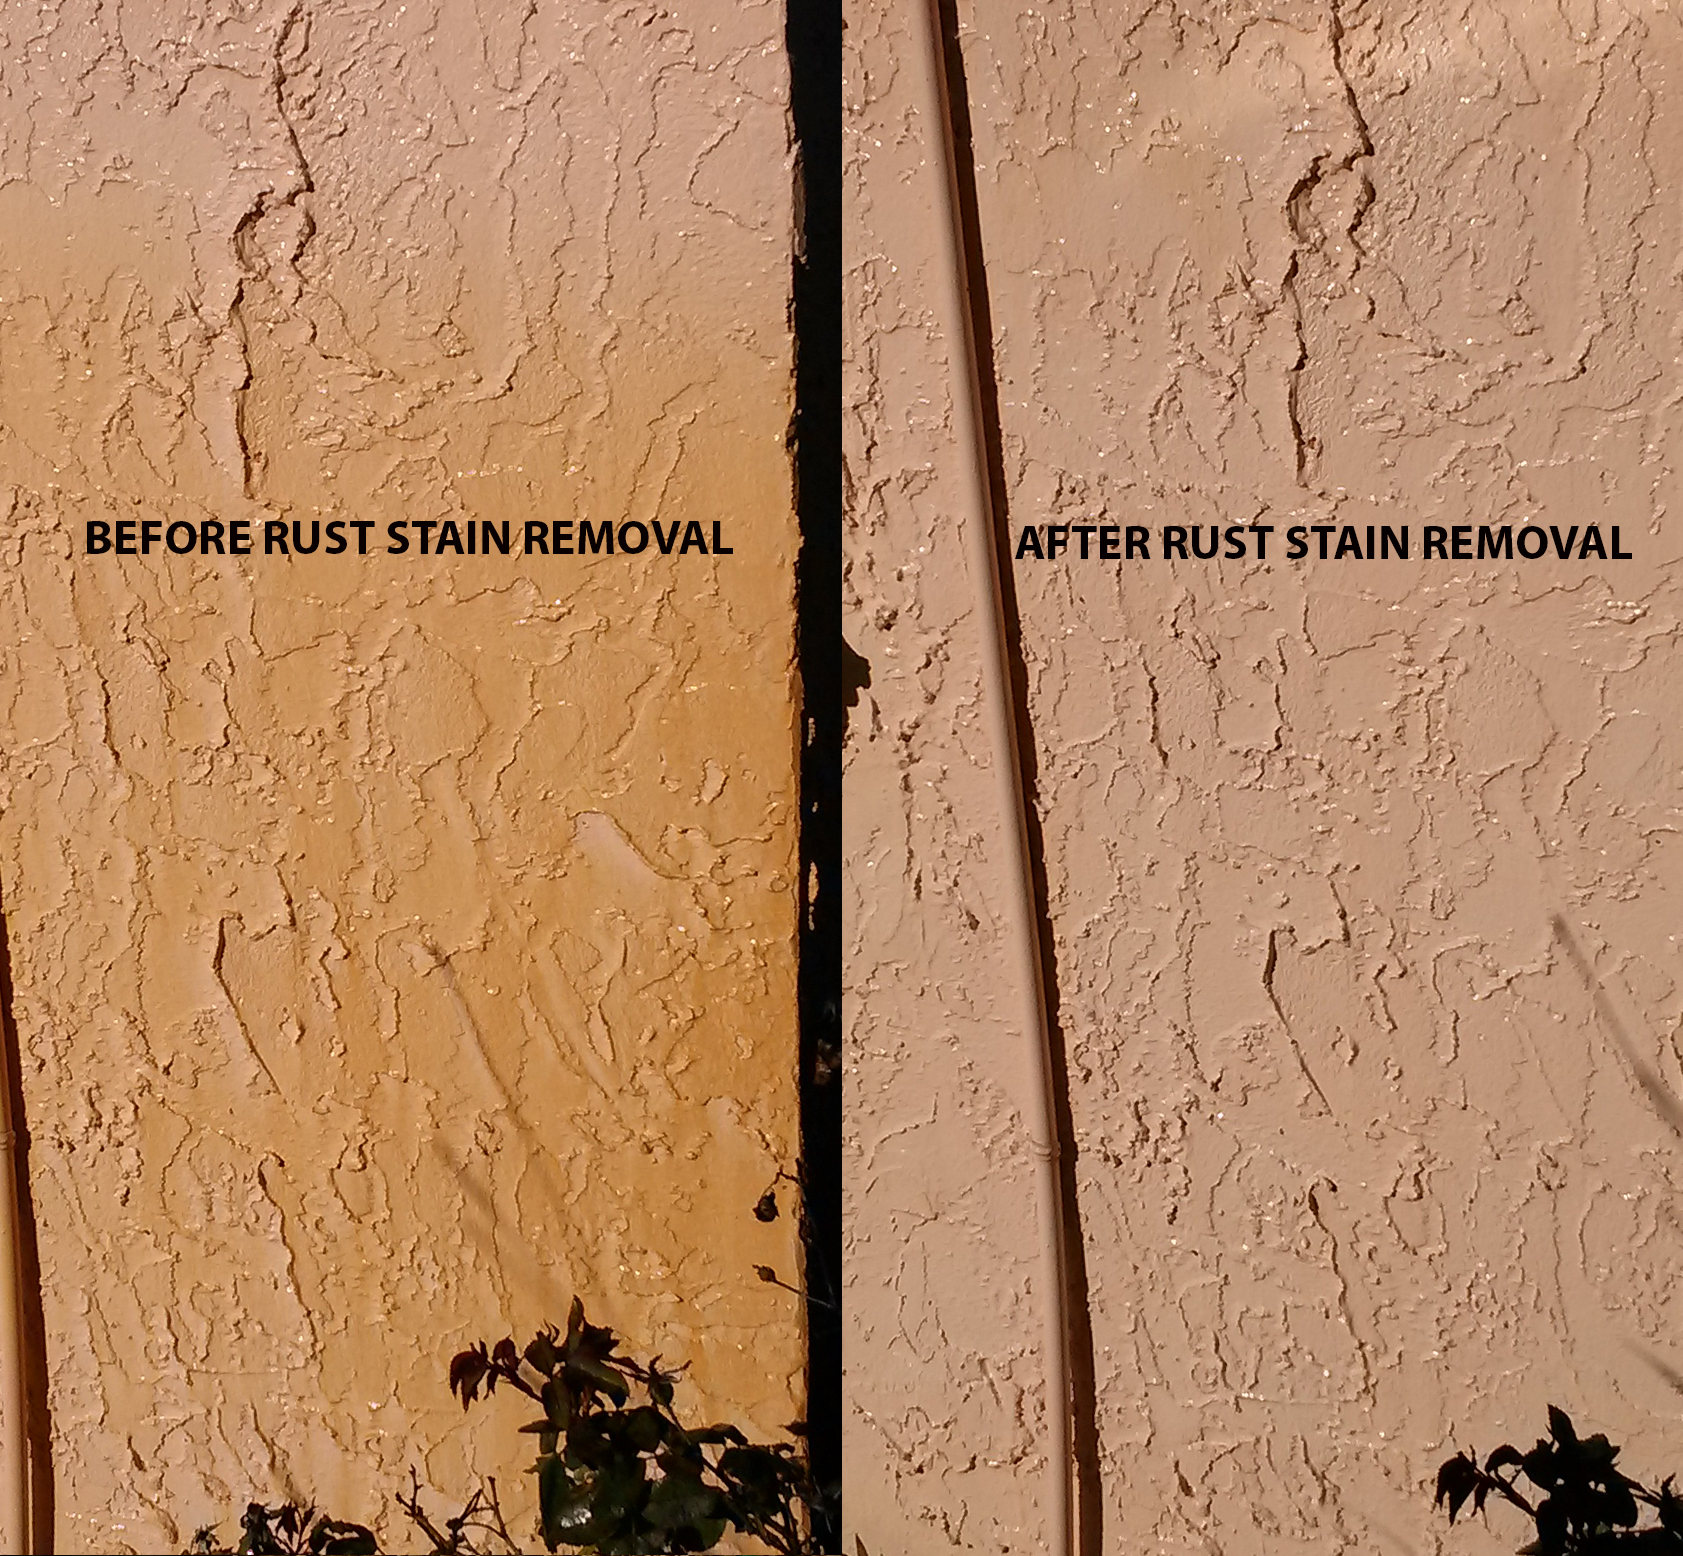 DIY: How to Remove Rust Stains 